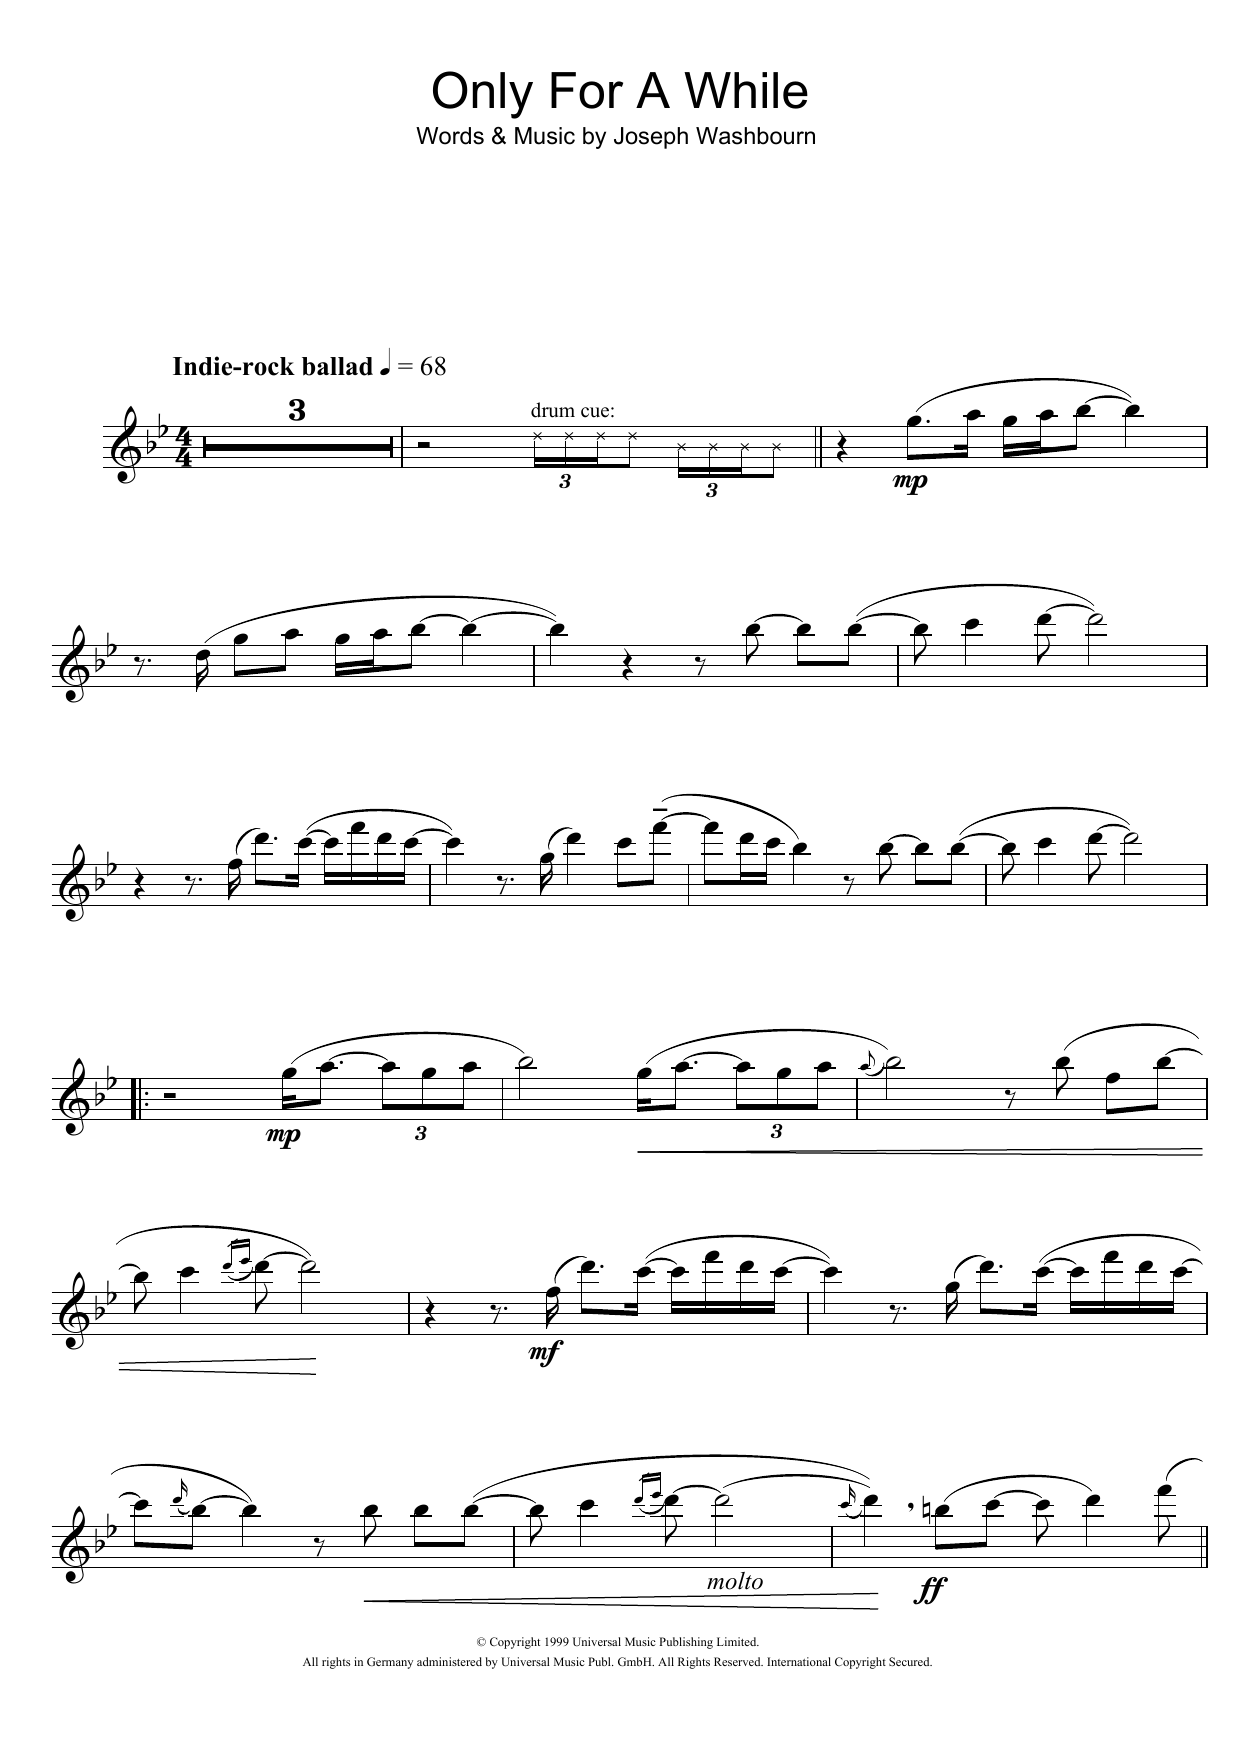 Download Toploader Only For A While Sheet Music